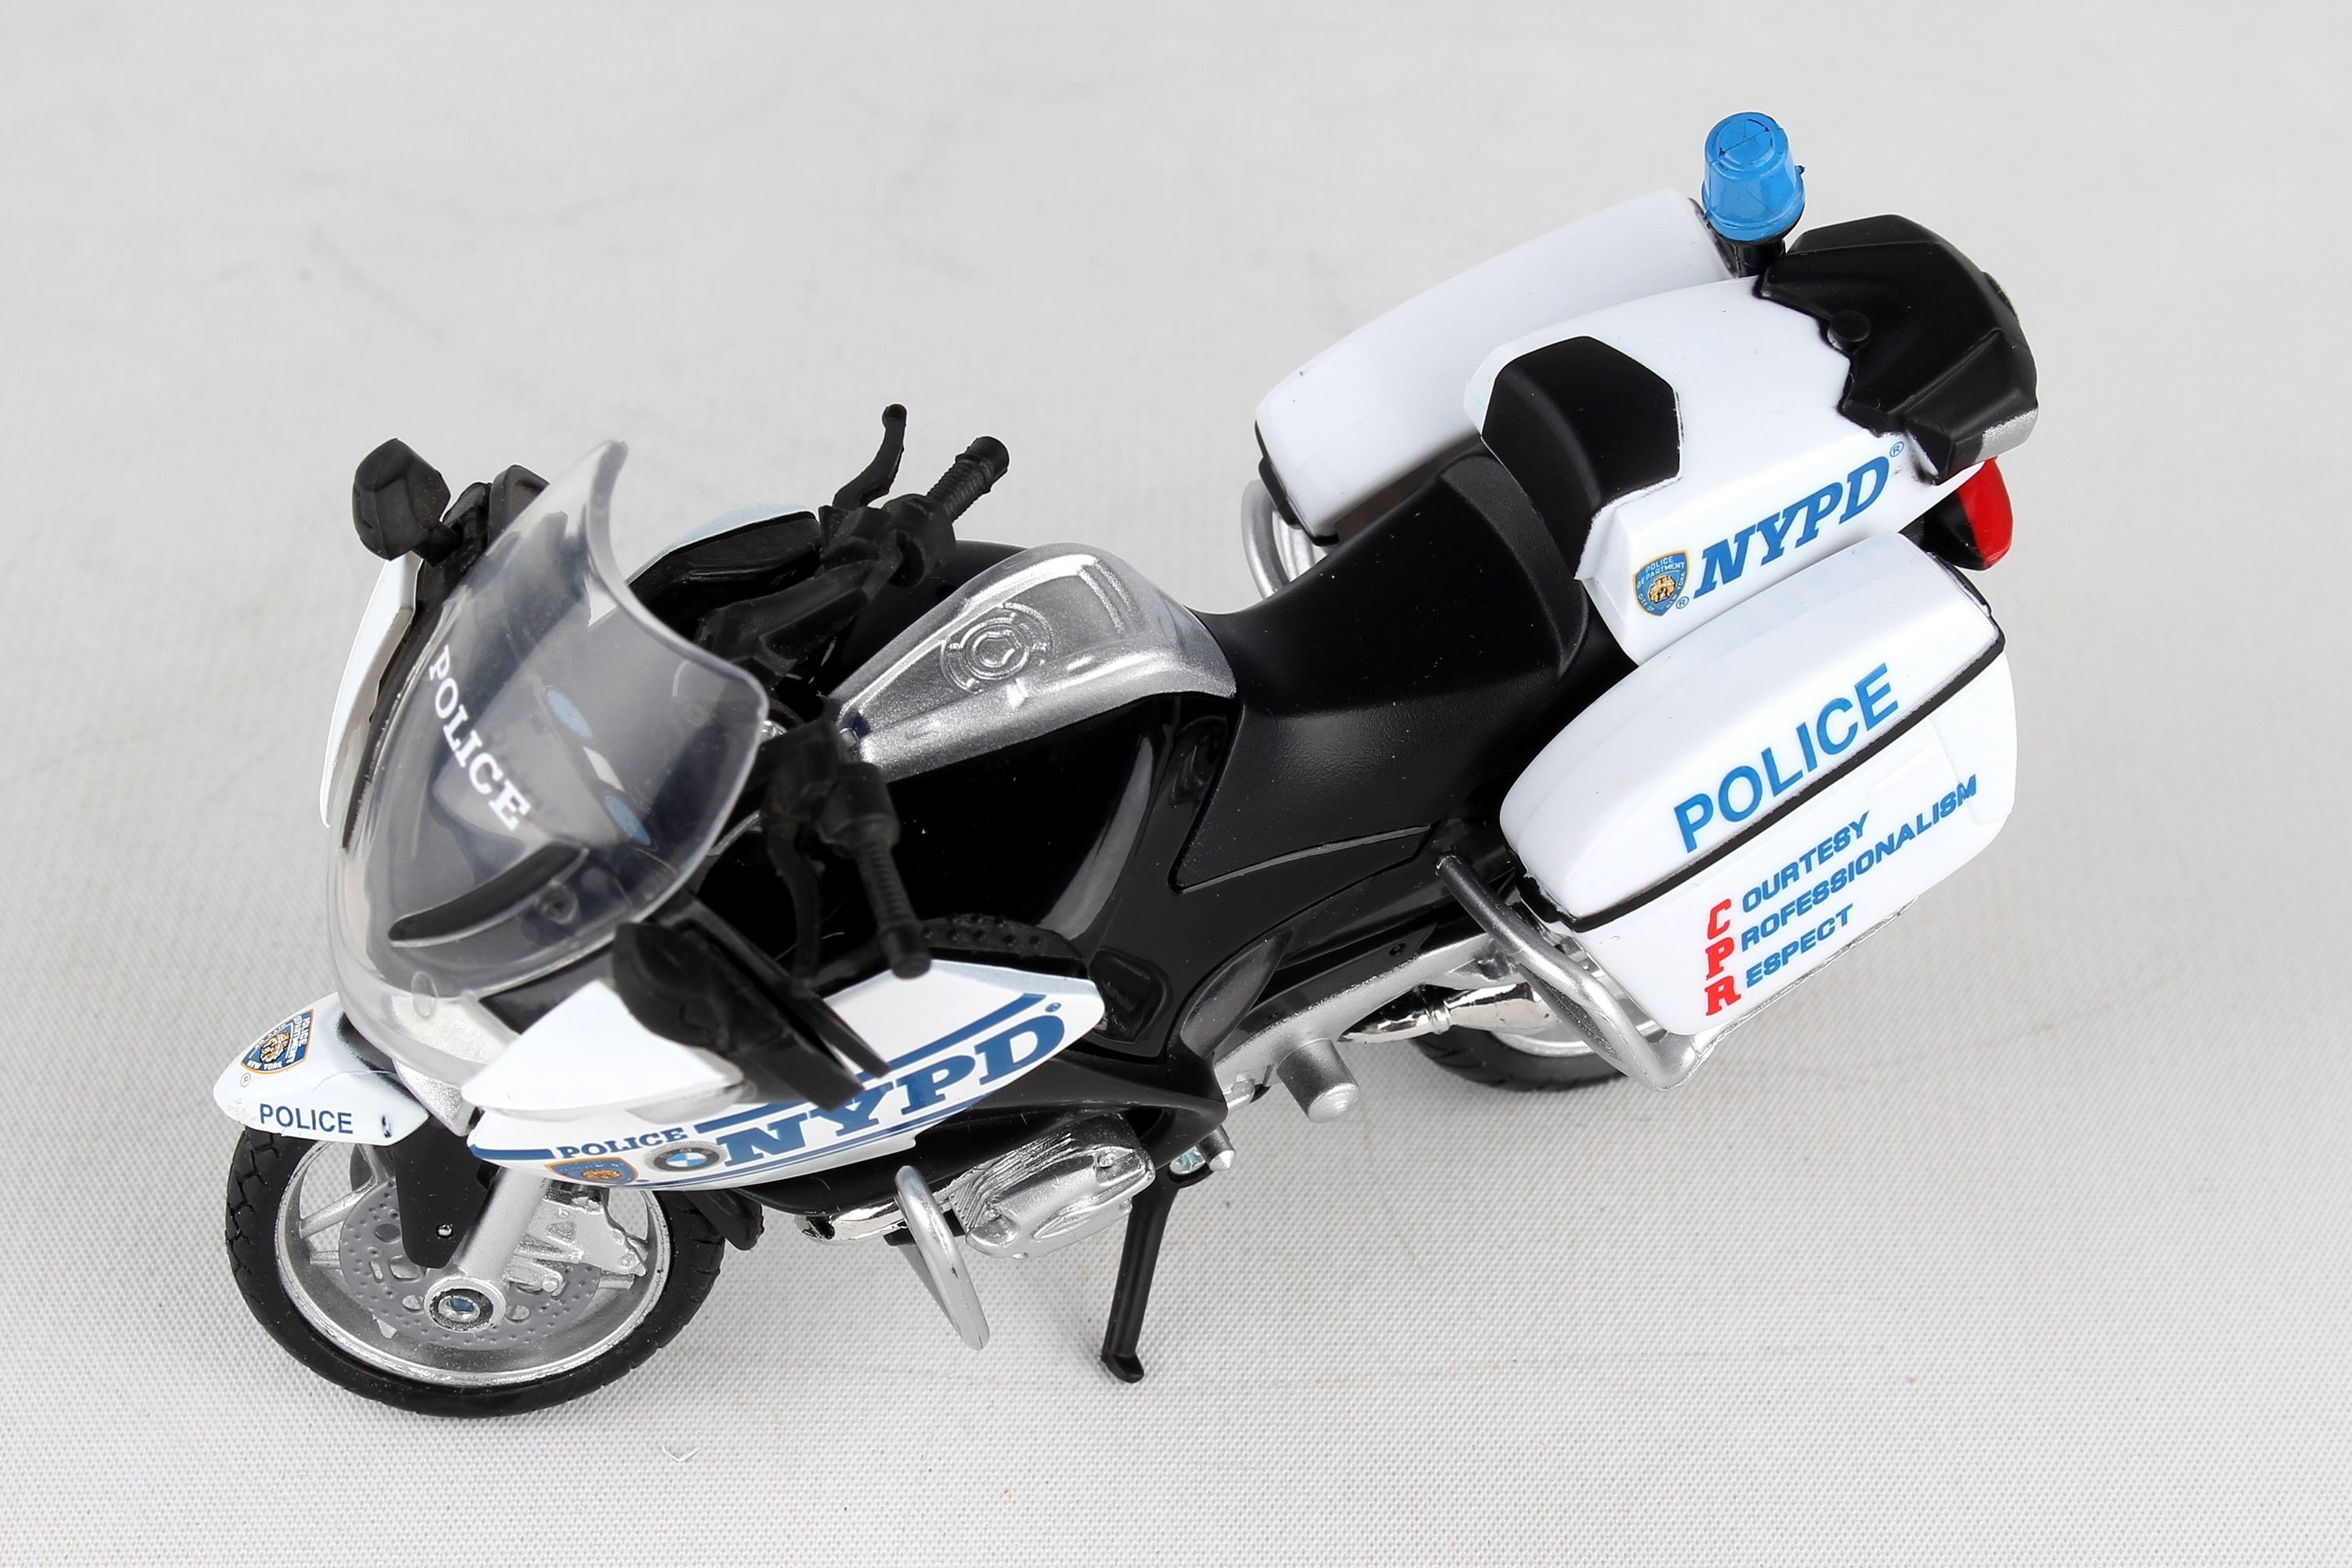 NYPD Police Motorcycle Diecast Model Toy NR67555 Daron 1:18 NYPD Licensed 